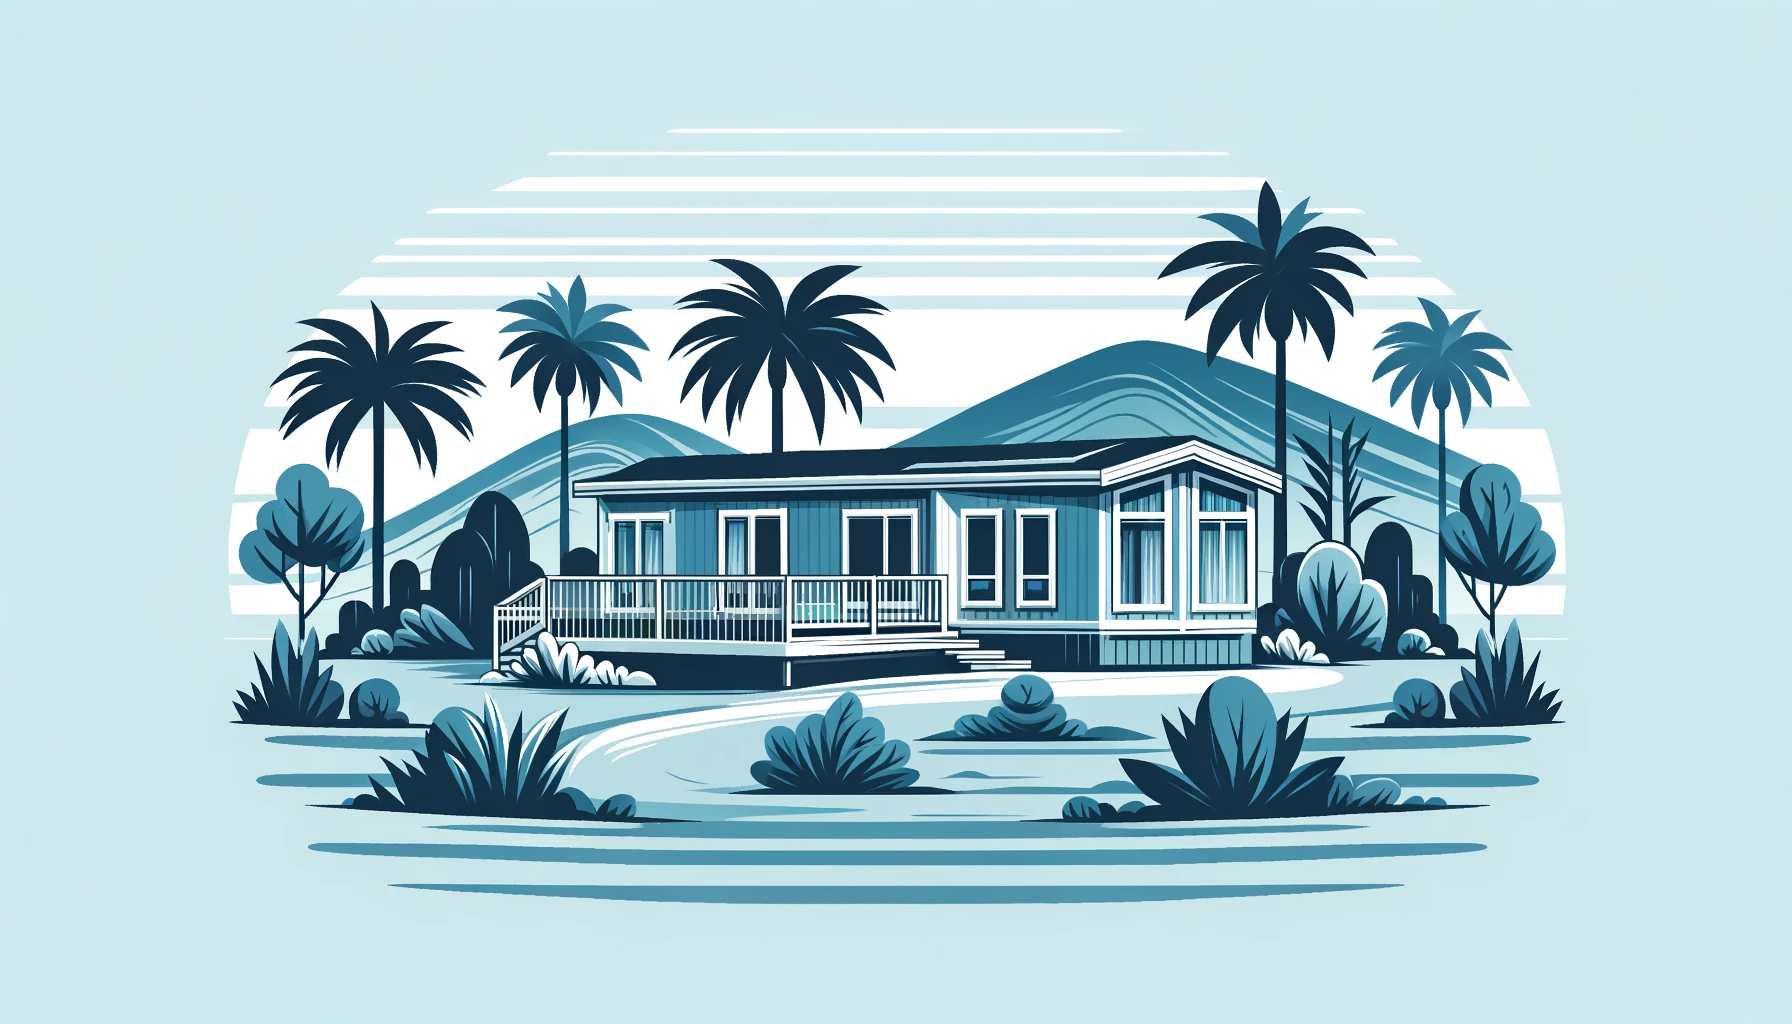 California-style manufactured home in a landscape with palm trees and hills, symbolizing mobile home insurance in California, in serene blue tones